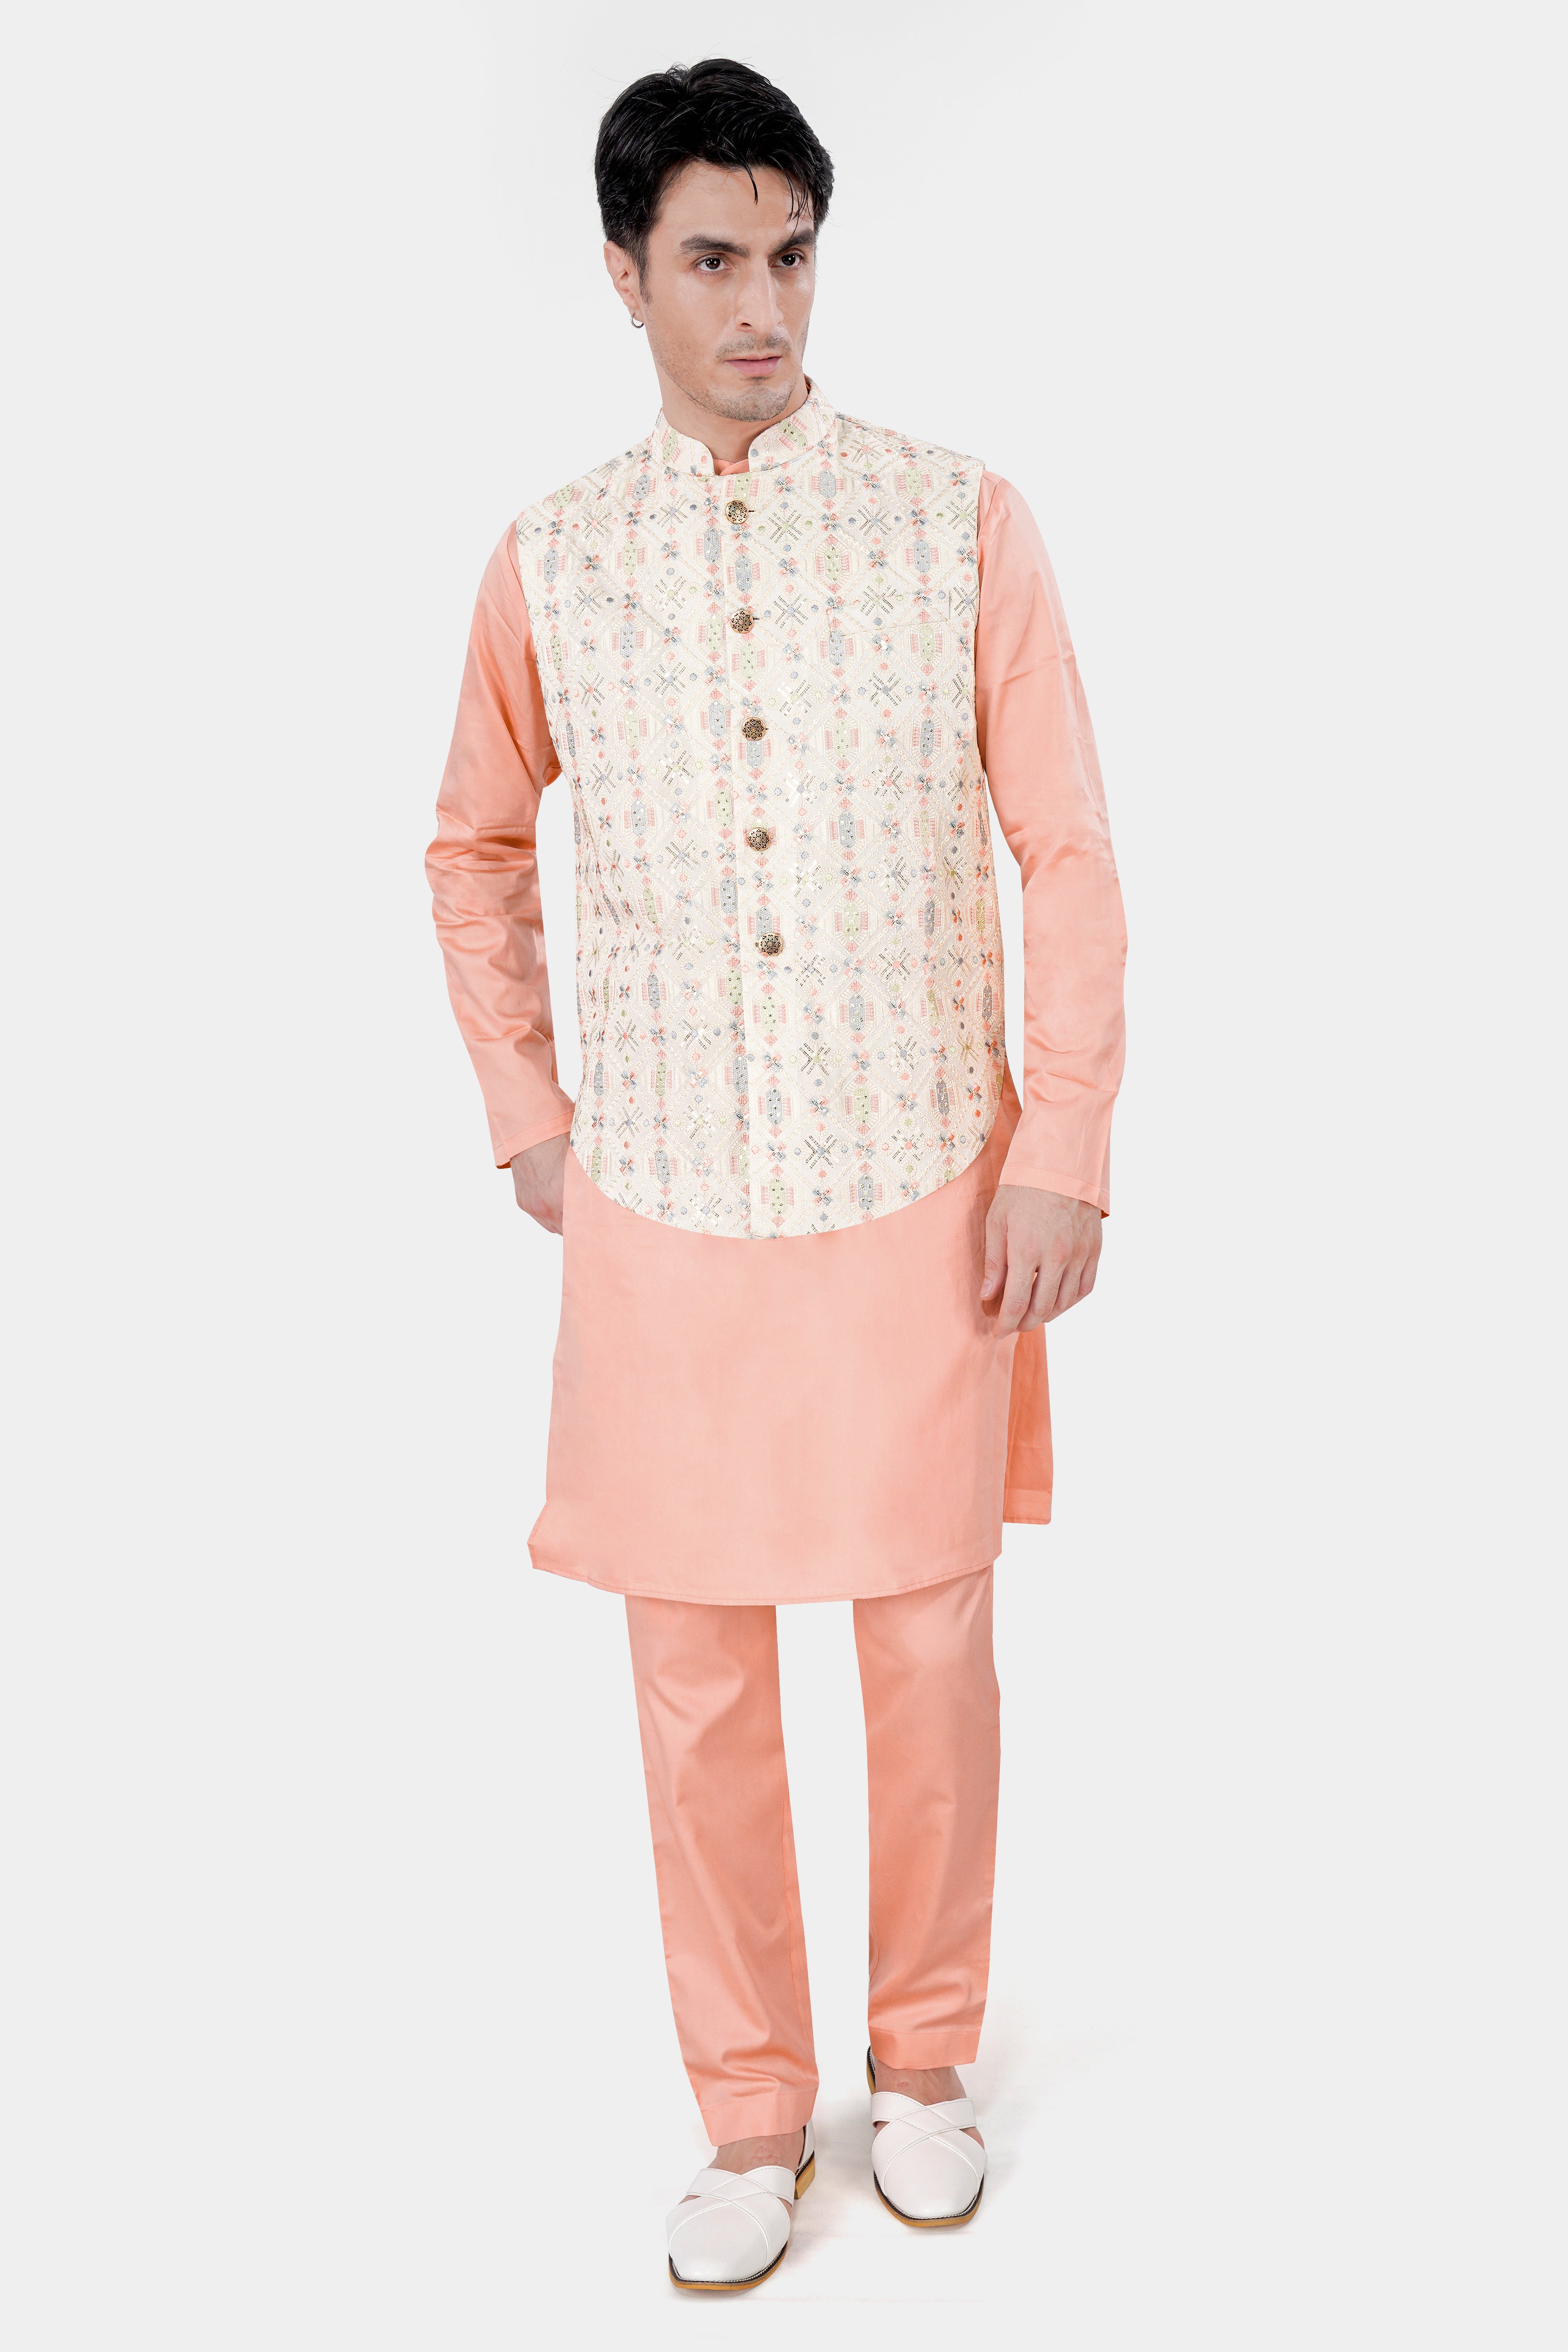 Pearl Cream Embroidered with Sequins Work Sleeveless Jacket with Cashmere Peach Kurta and Pajama Set